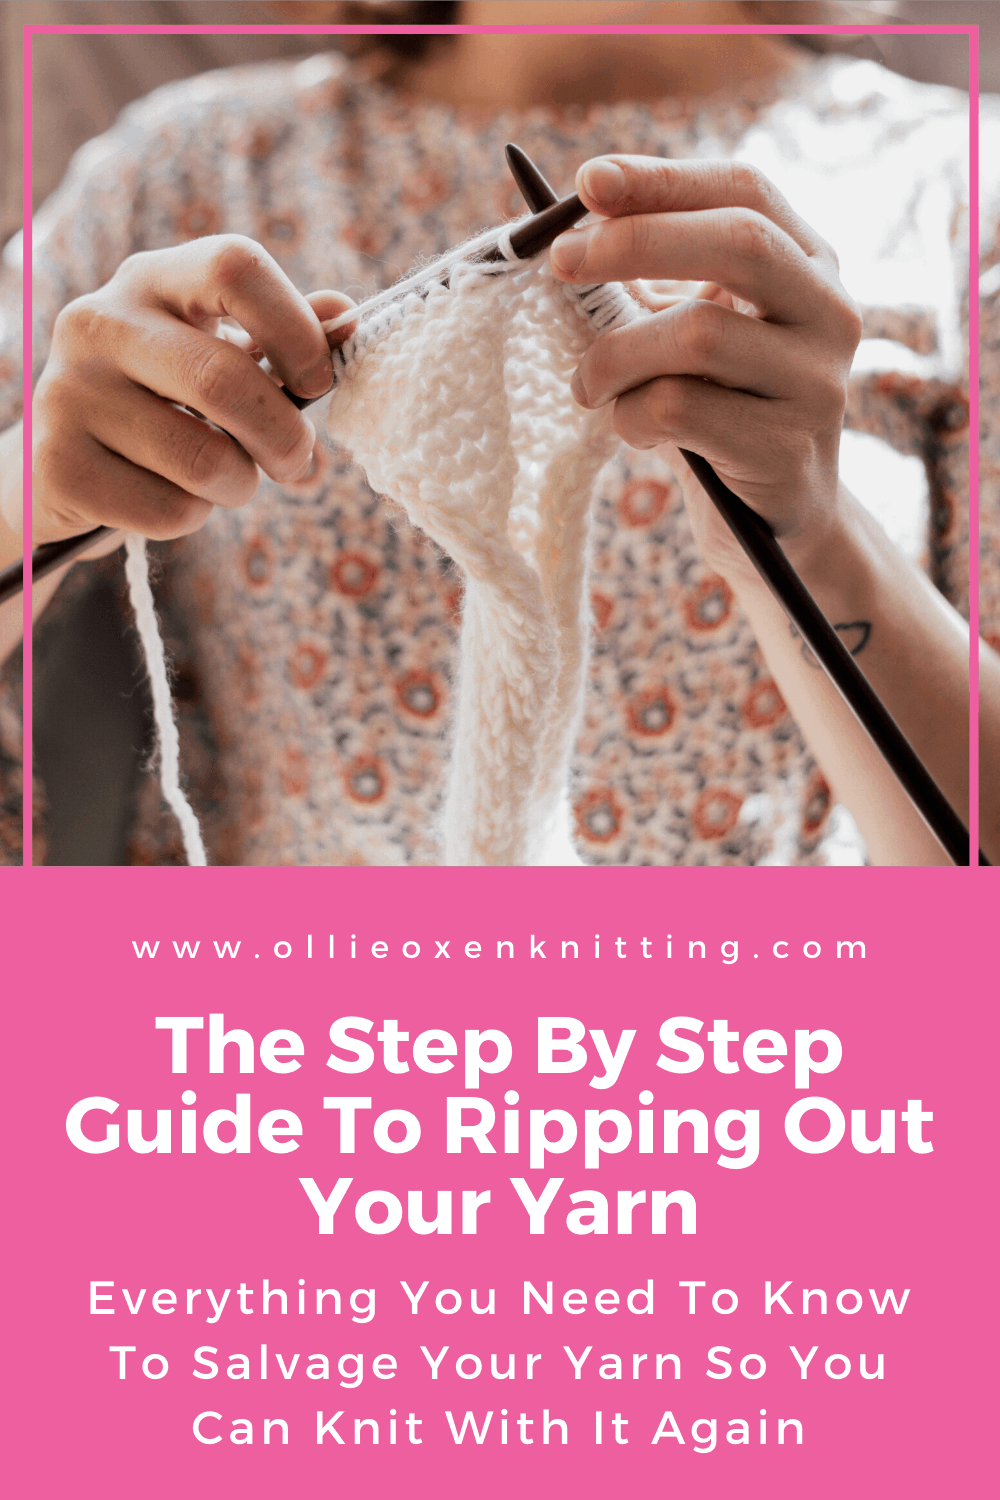 The Step By Step Guide To Ripping Out Your Yarn: Everything You Need To Know To Salvage Your Yarn So You Can Knit With It Again | Ollie Oxen Knitting